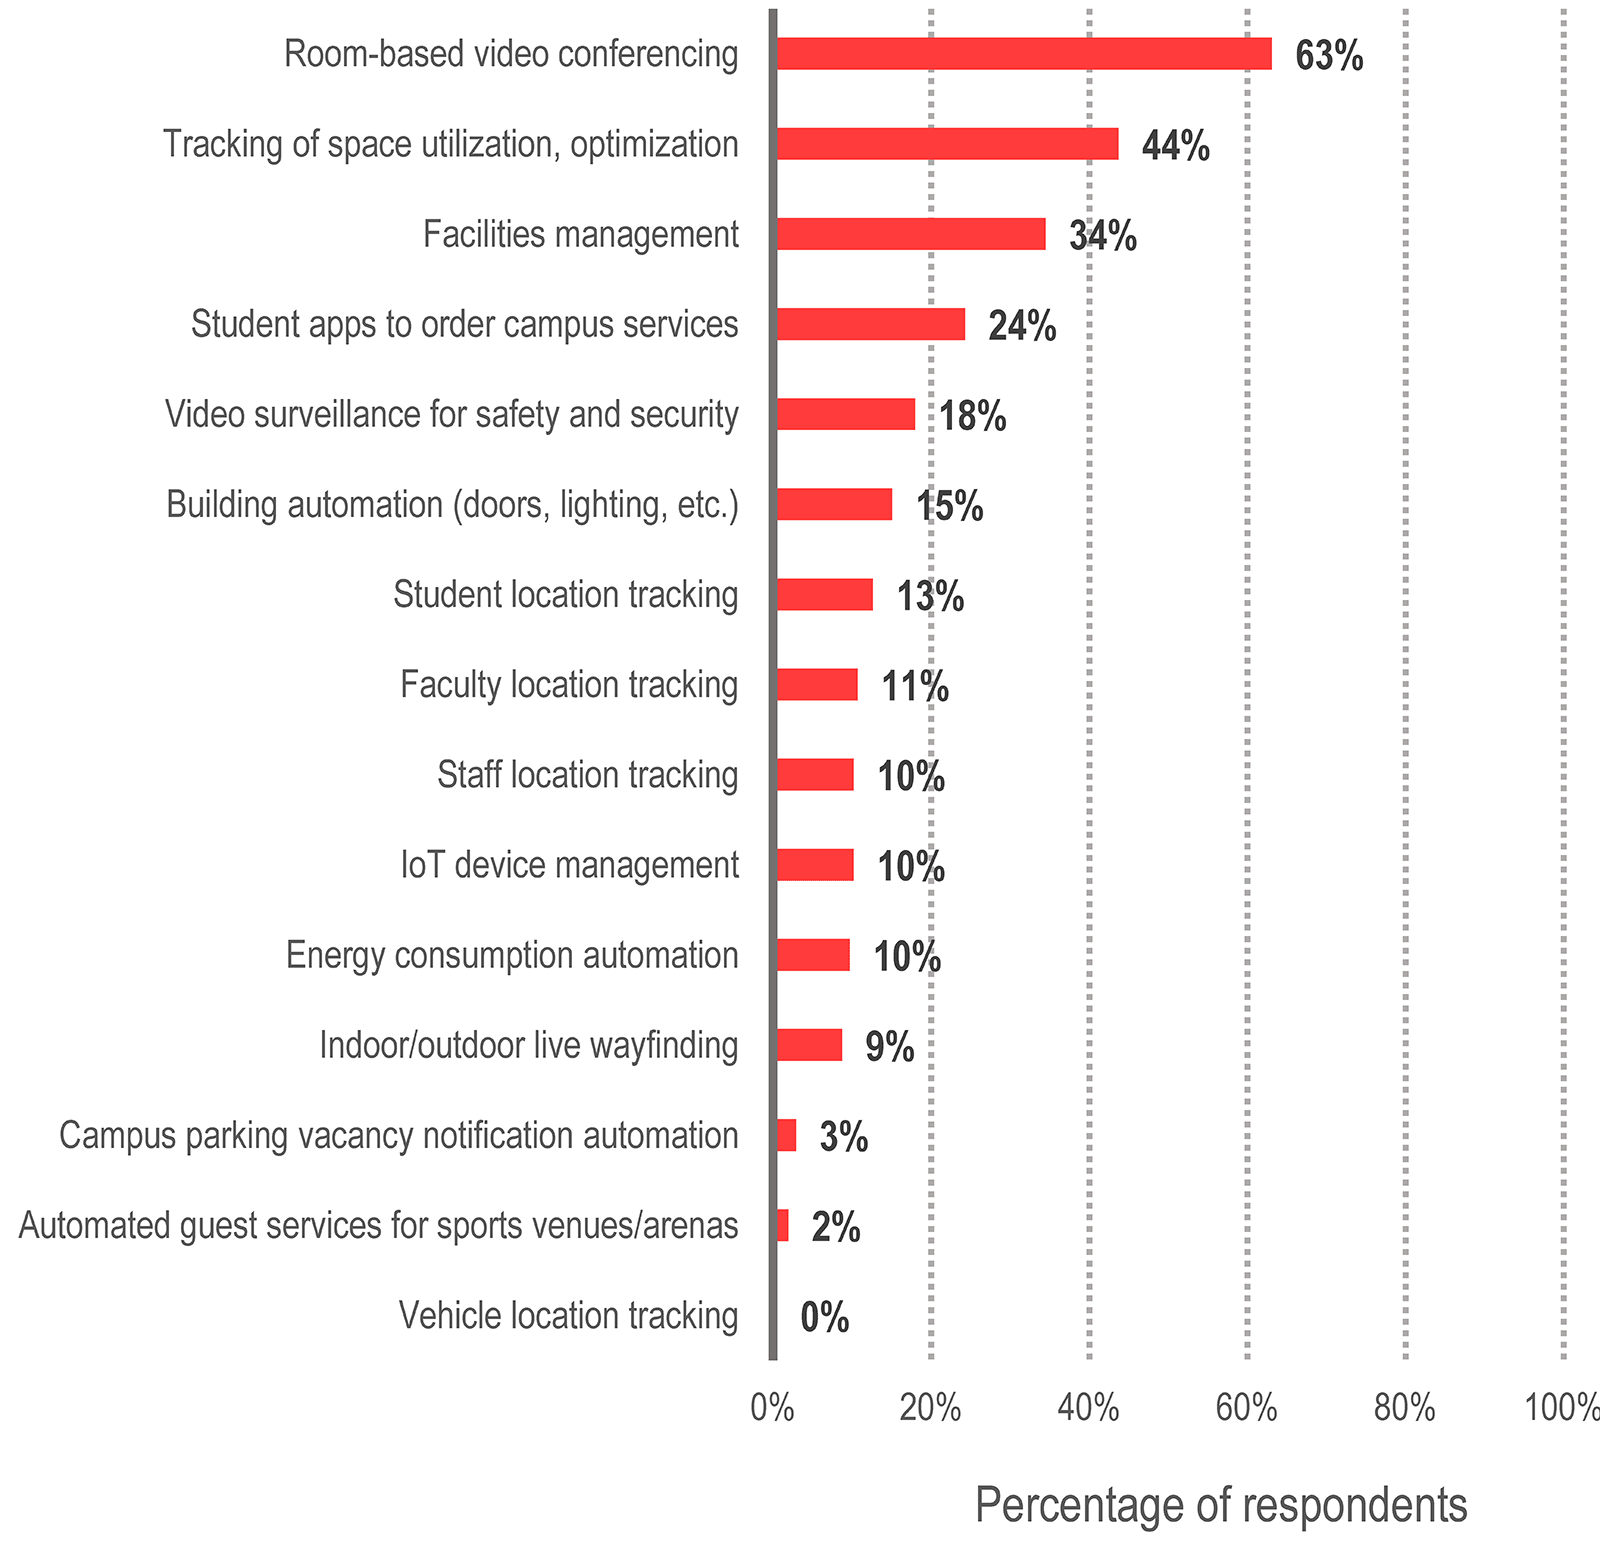 bar graph showing which items respondents said would be priorities in their physical space planning.
Room-based video conferencing 63%.
Tracking of space utilization, optimization 44%.
Facilities management 34%.
Student apps to order campus services 24%.
Video surveillance for safety and security 18%.
Building automation (doors, lighting, etc) 15%.
Student location tracking 13%.
Facultly location tracking 11%.
Staff location tracking 10%.
IoT device management 10%.
Energy consumption automation 10%
Indoor/outdoor live wayfinding 9%.
Campus parking vacancy notification automation 3%.
Automated guest services for sports venues/arenas 2%.
Vehicle location tracking 0%.
